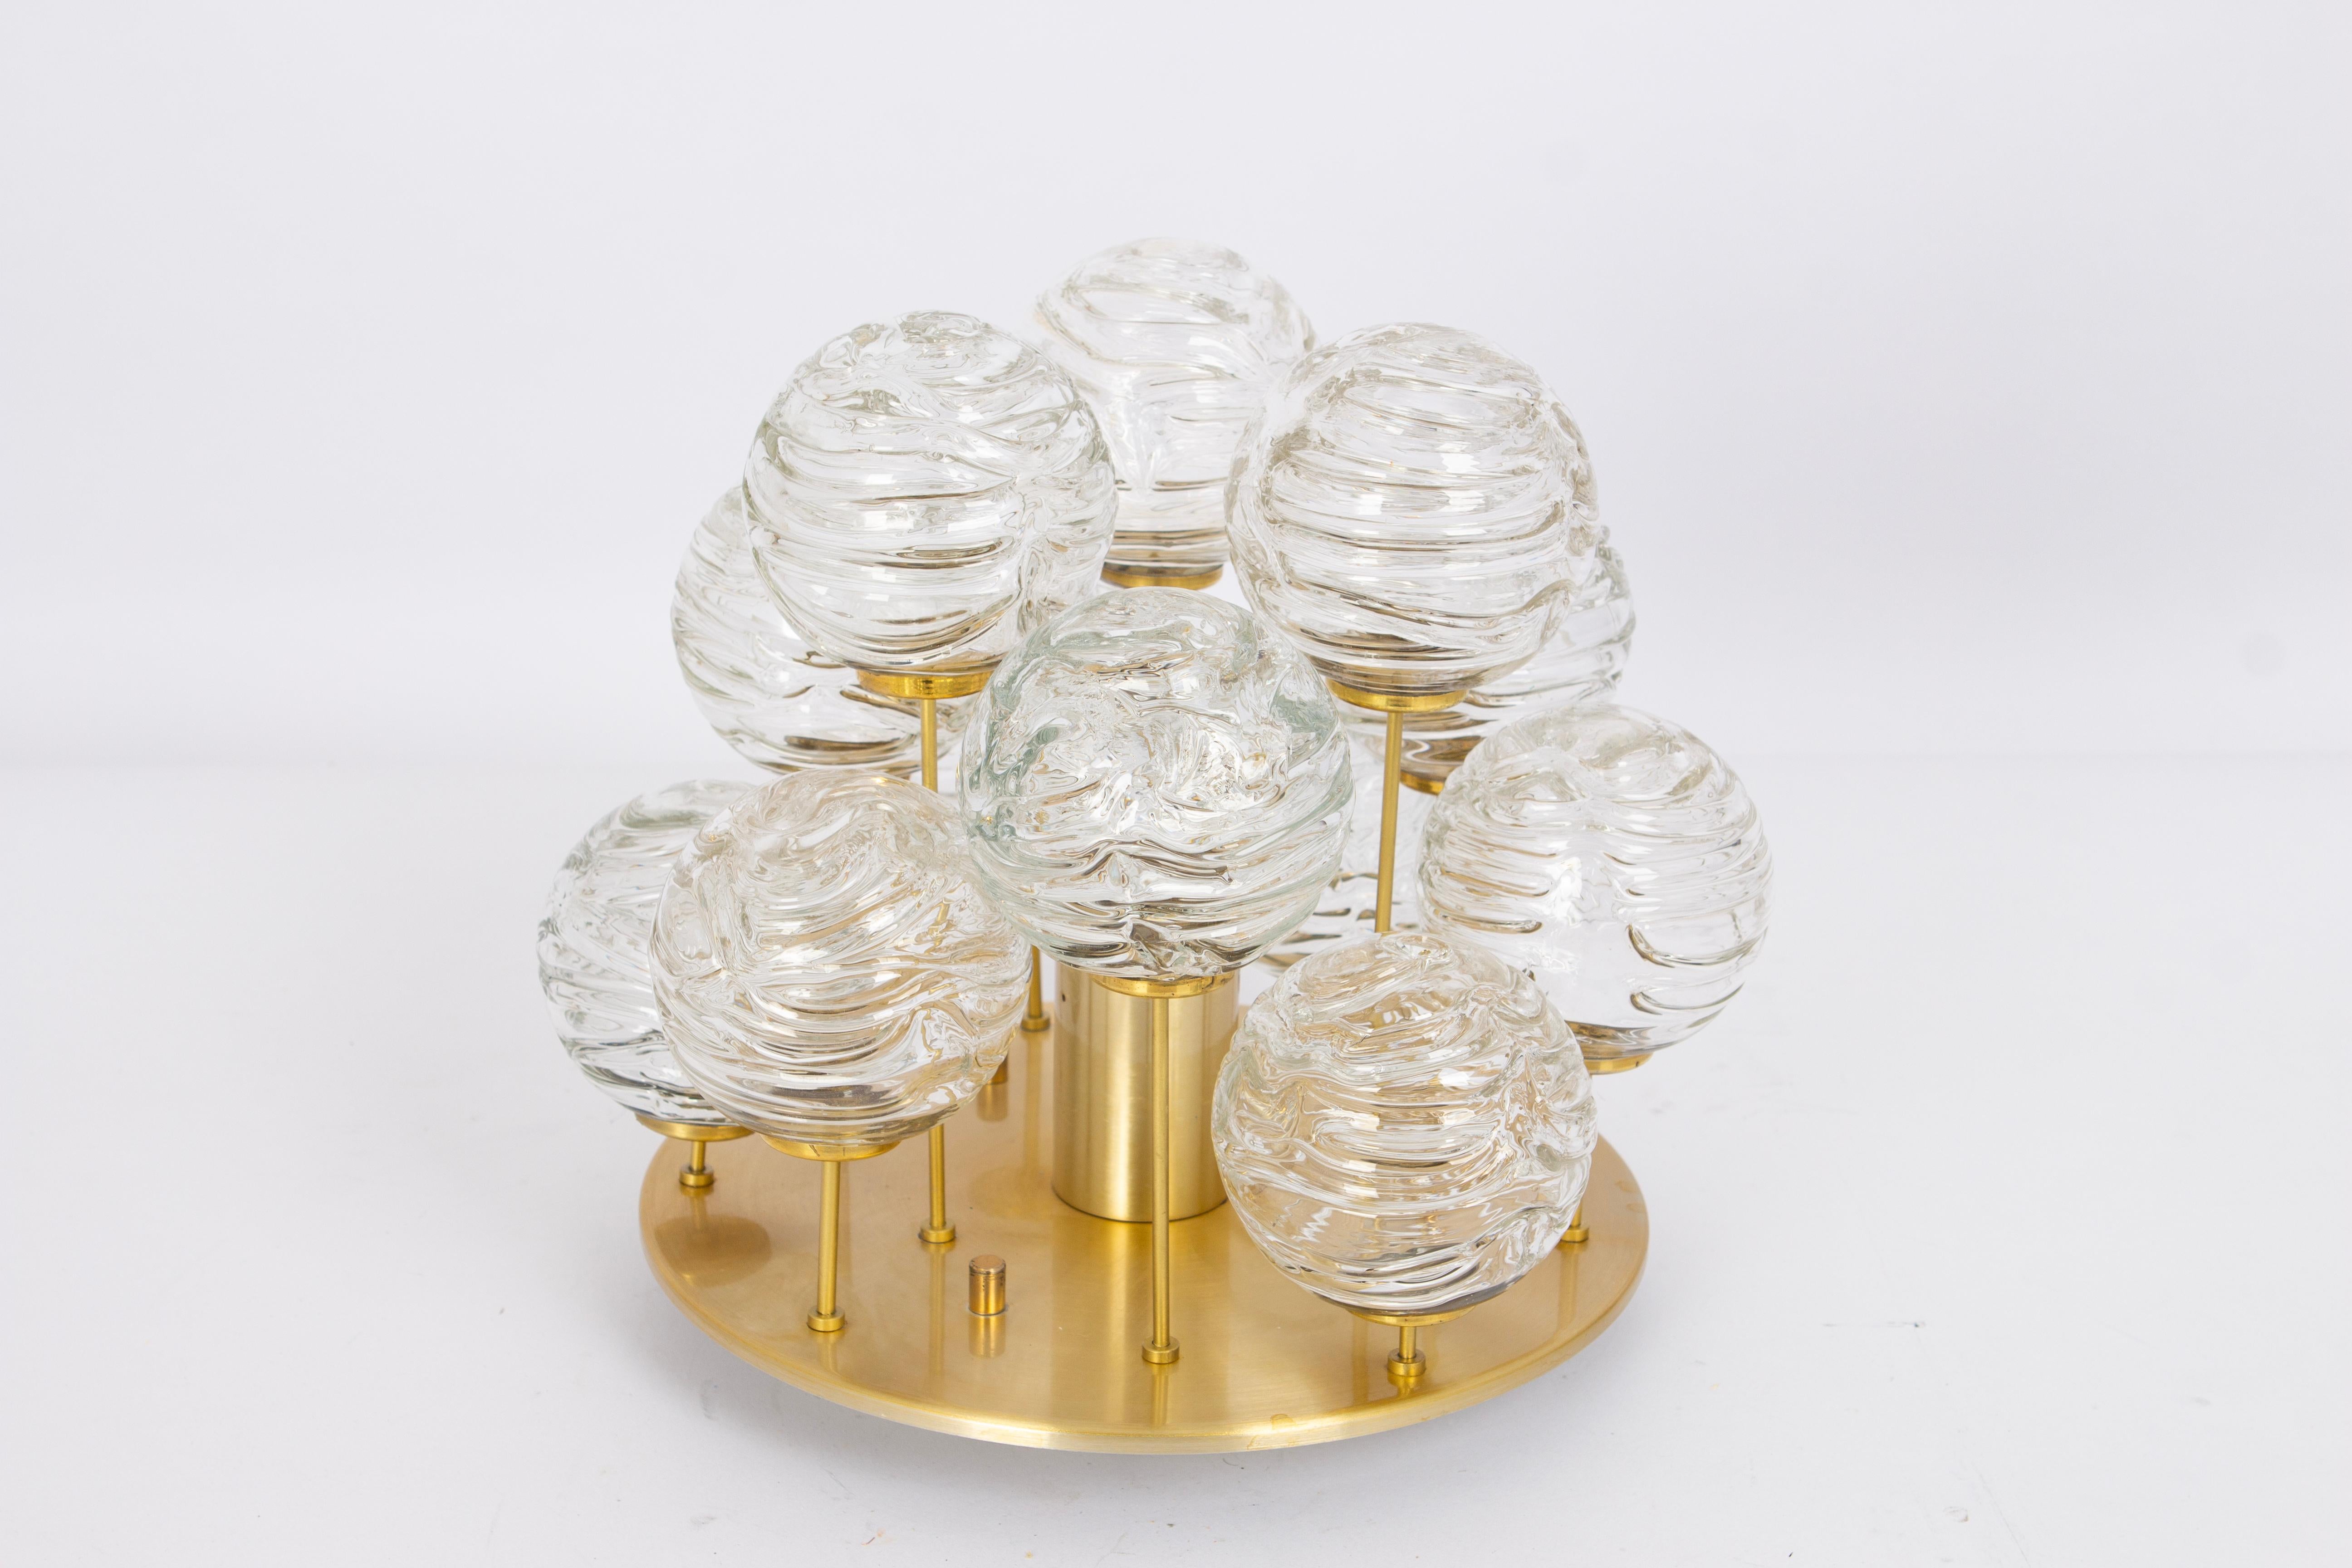 A Petite midcentury flush mount light made by Doria Leuchtern, manufactured in Germany, circa 1970-1979.

The flushmount is composed of many Glass swirl textured ice glass elements (snowballs) attached to a brass frame.
Made by Doria in Germany,